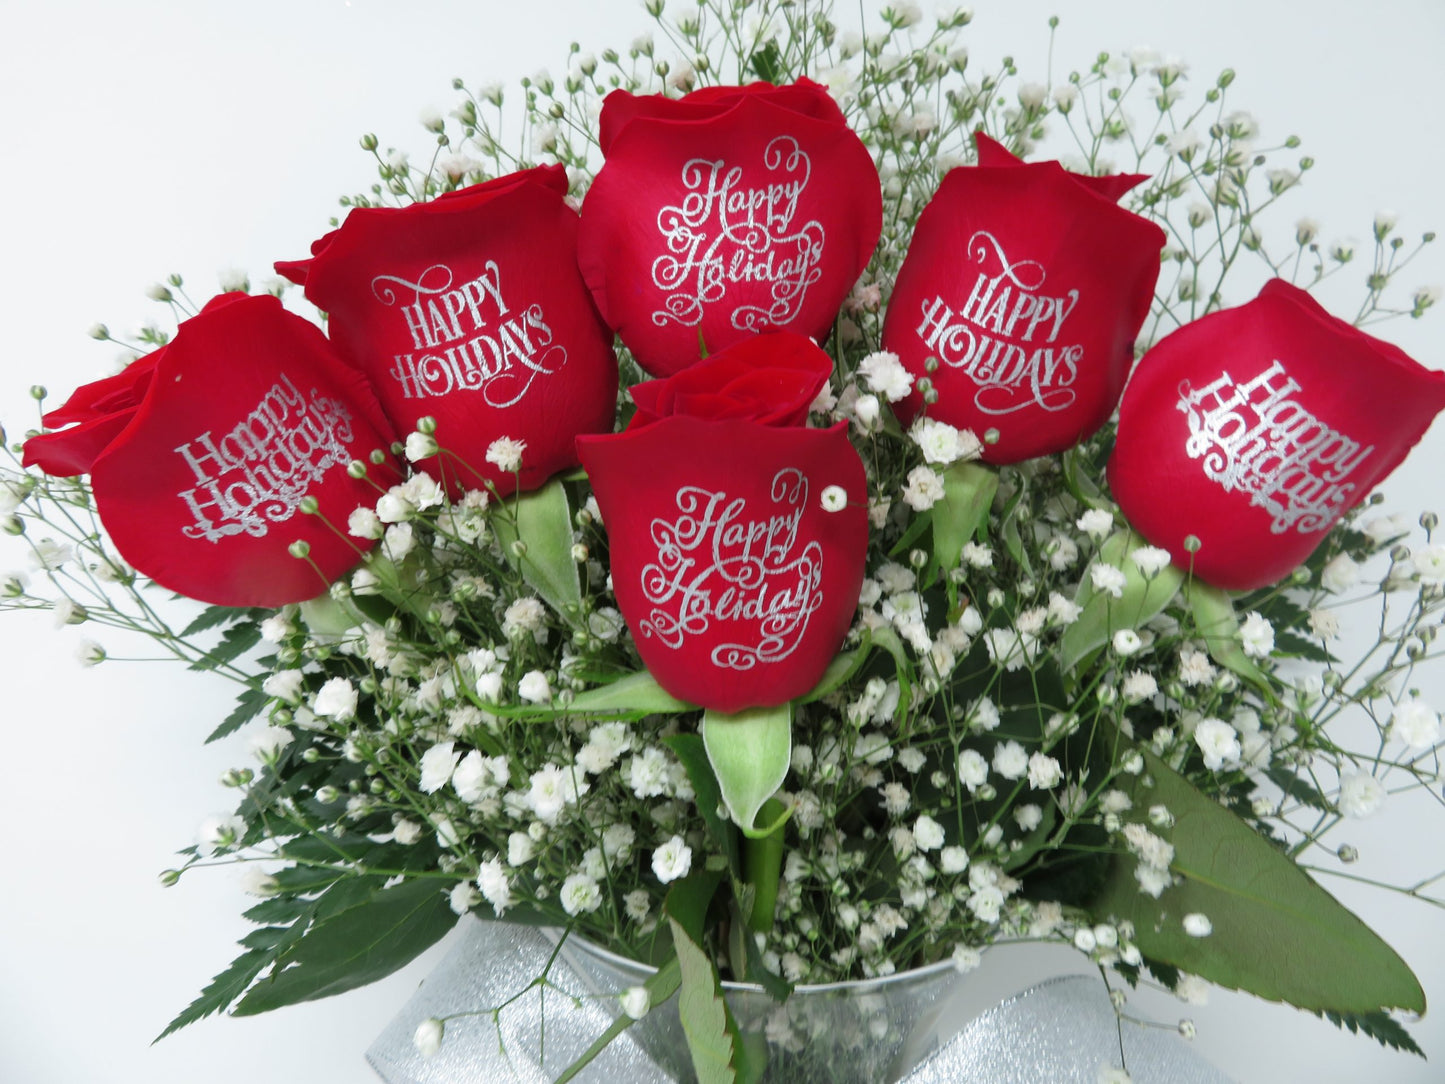 Happy Holidays - 6 Red Roses Engraved with Silver Ink